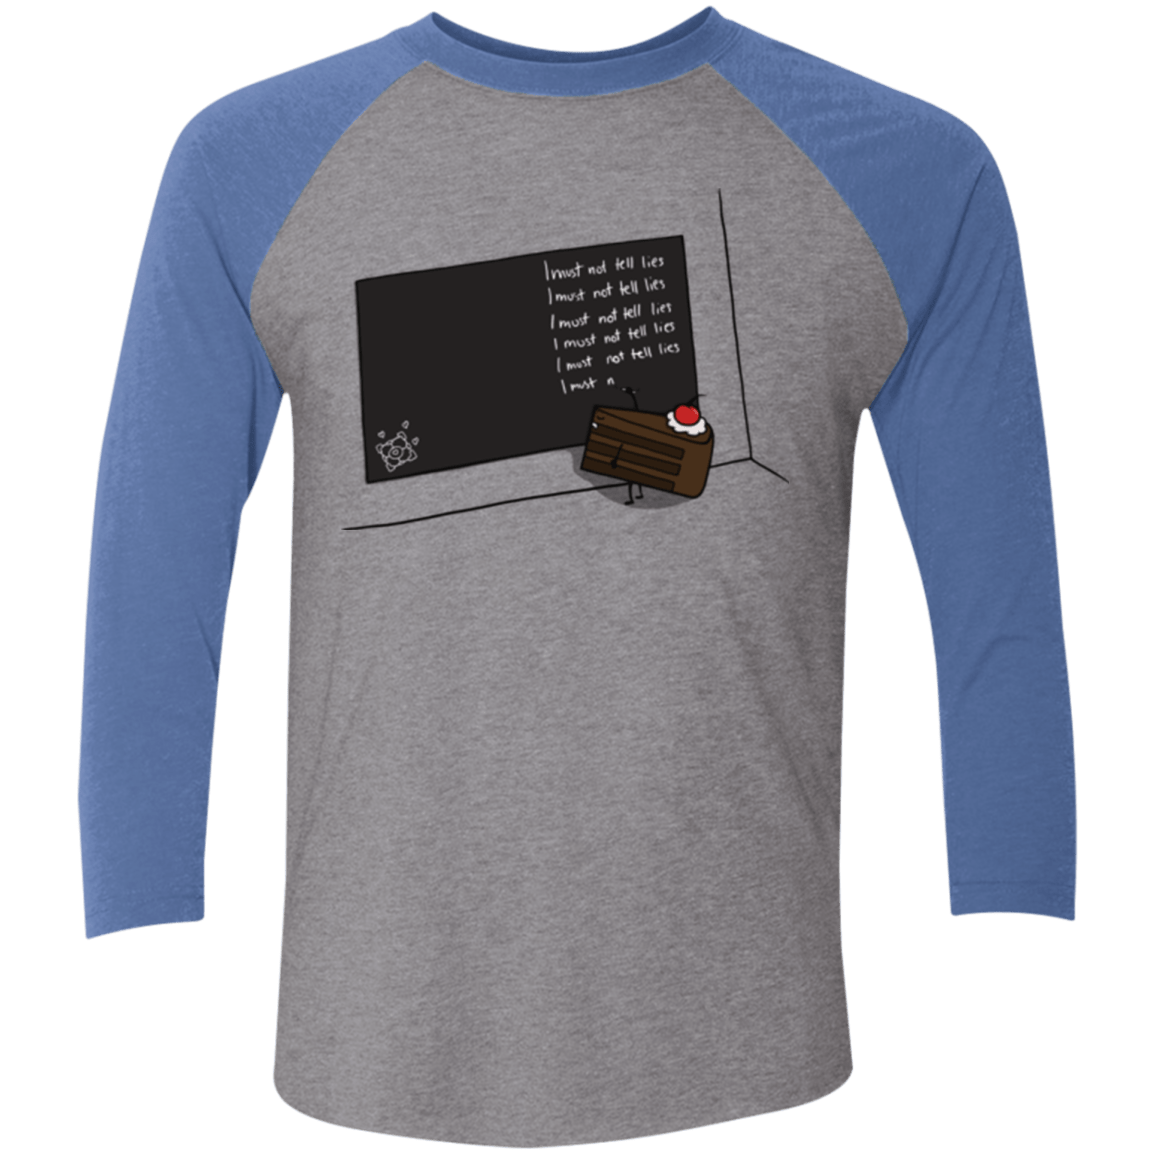 T-Shirts Premium Heather/ Vintage Royal / X-Small The Cake is a Lie Men's Triblend 3/4 Sleeve